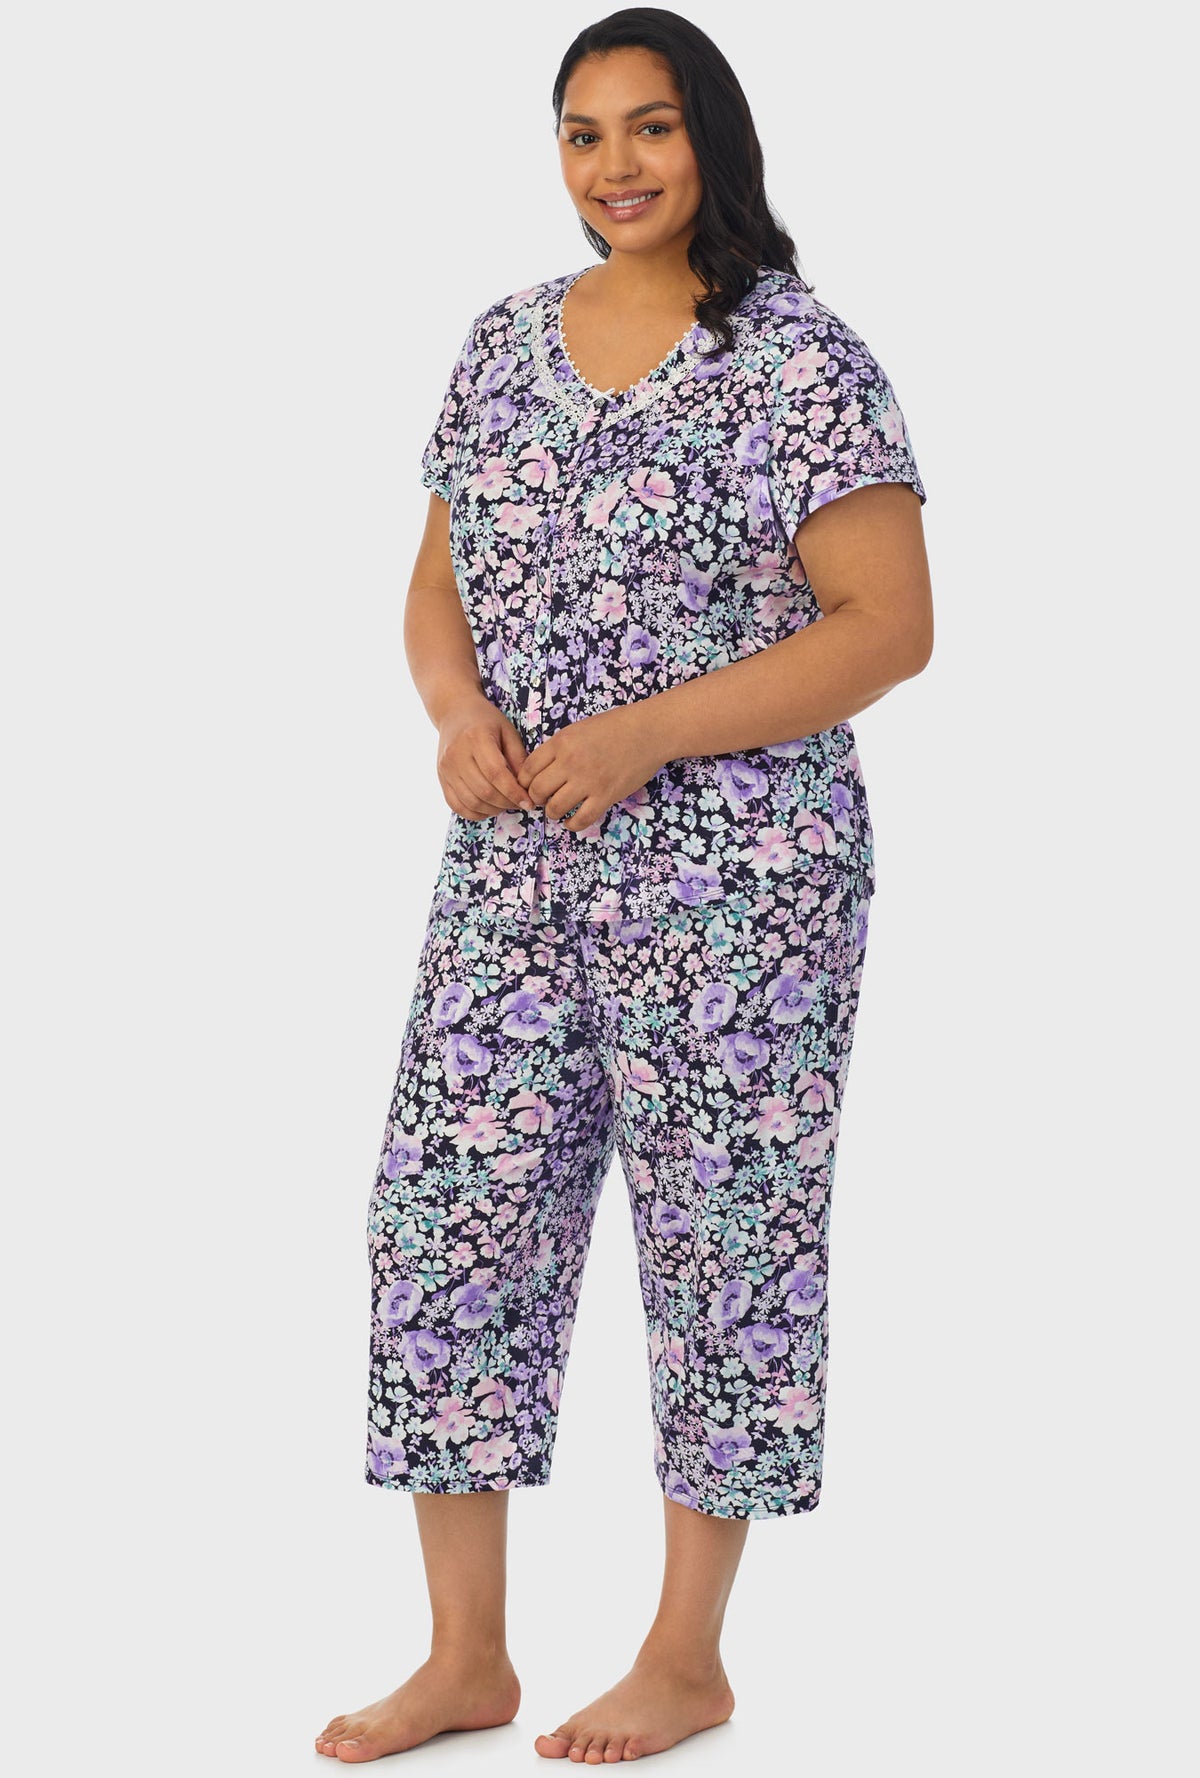 A lady wearing navy short sleeve capri pant plus size pj set with midnight blue floral print.